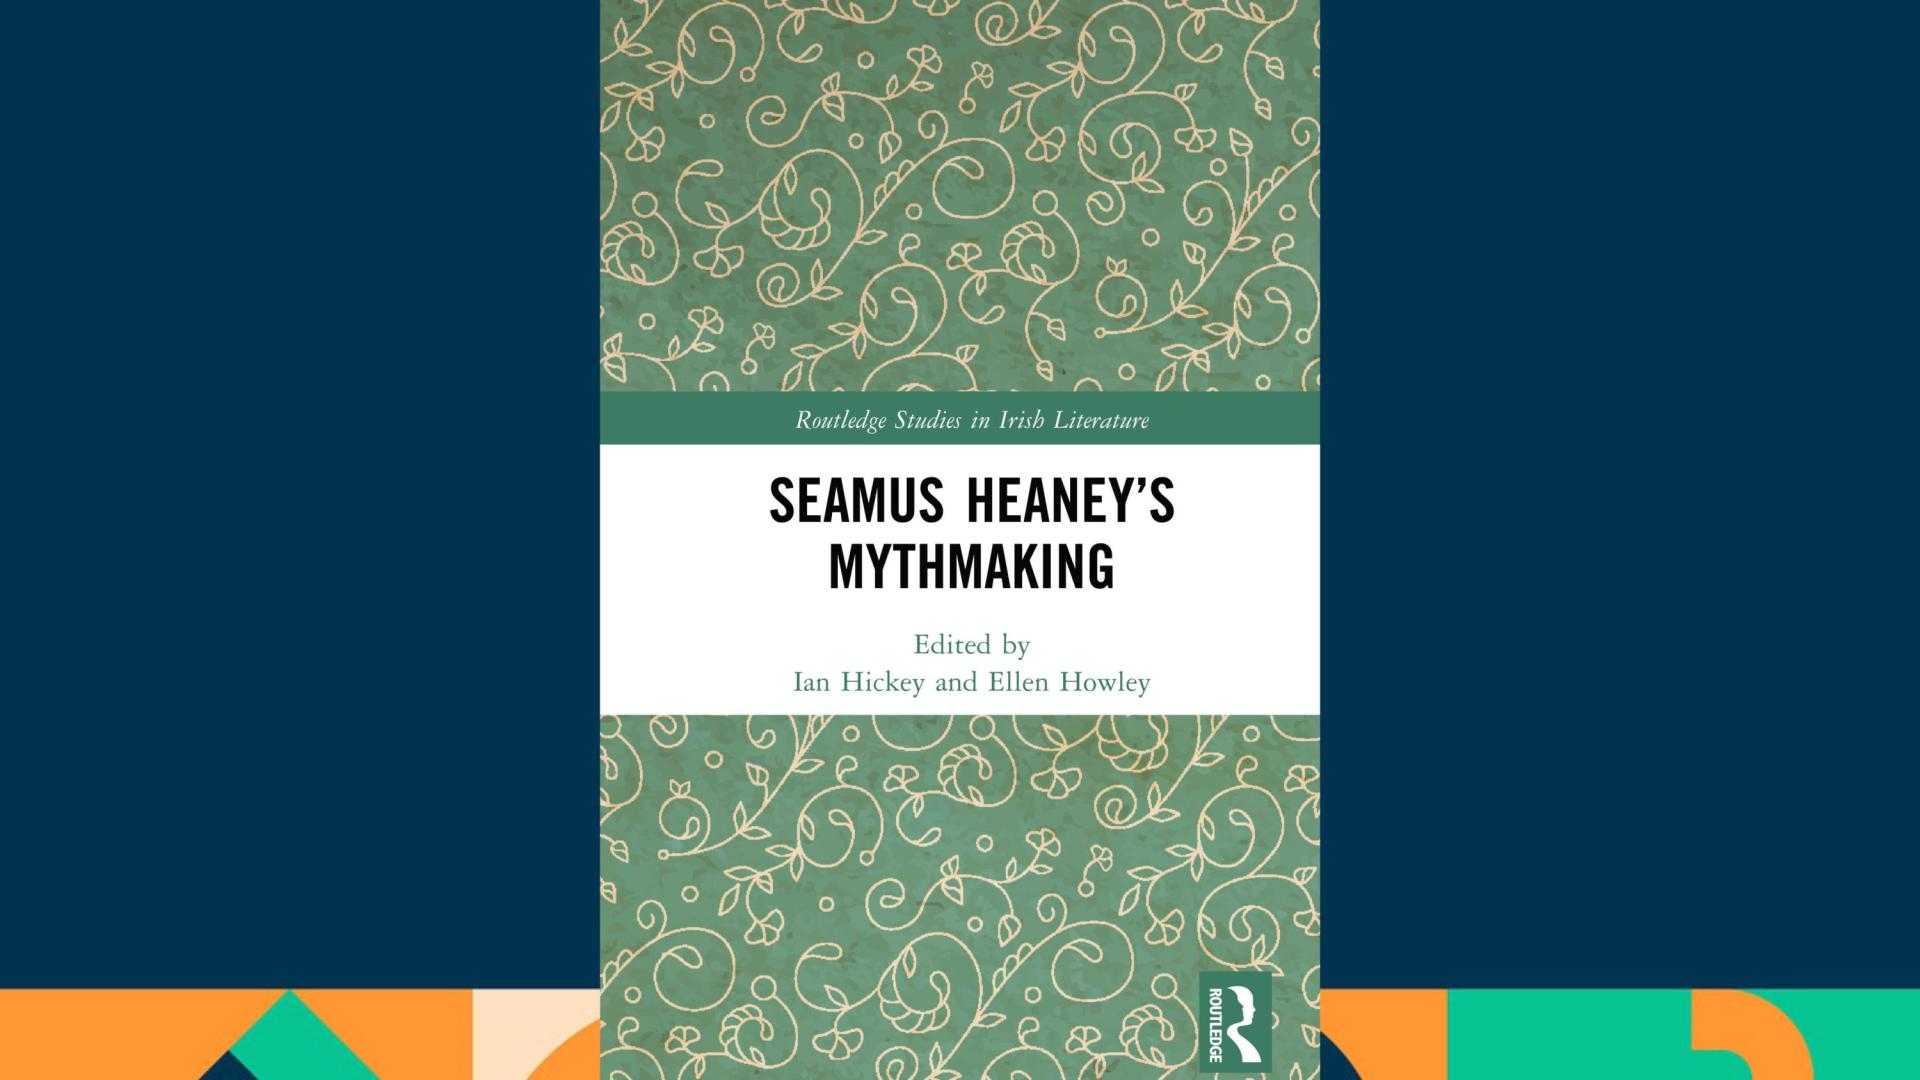 The book explores Seamus Heaney's use of myth across his career, and includes chapters from established Heaney scholars and early career researchers working on his poetry.